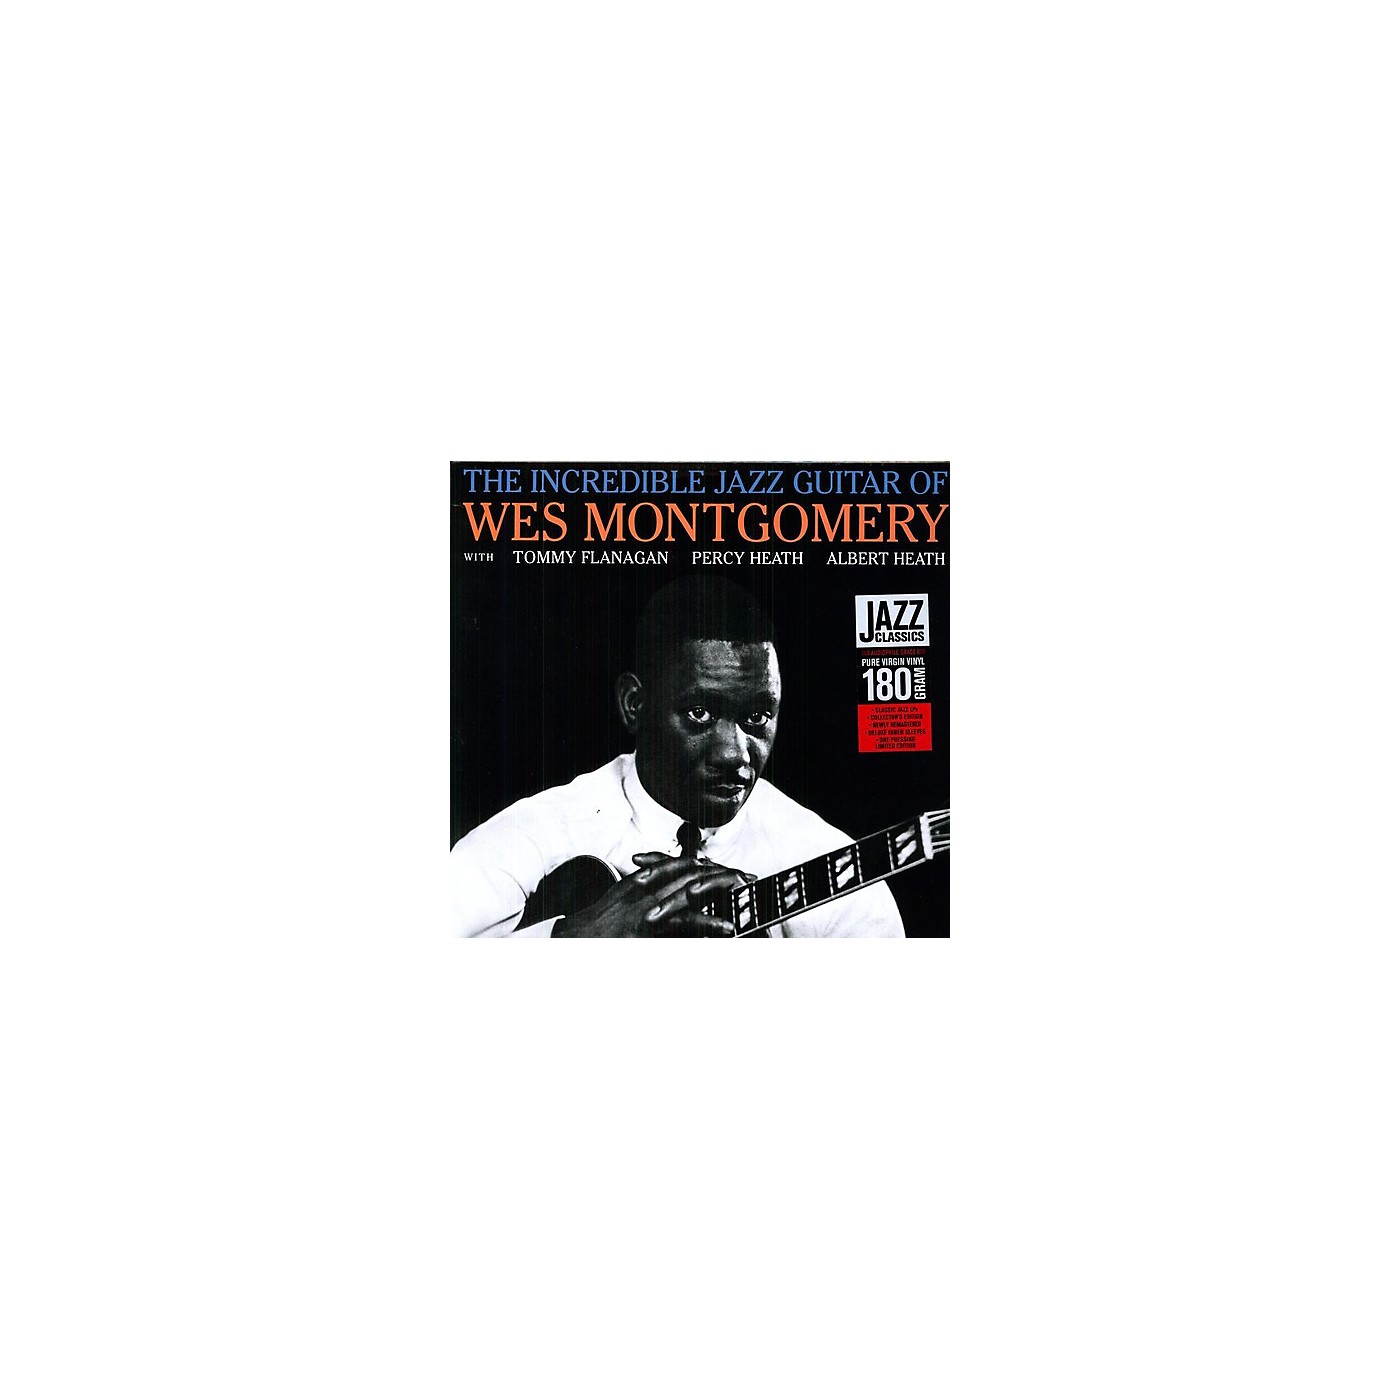 Alliance Wes Montgomery - Incredible Jazz Guitar thumbnail